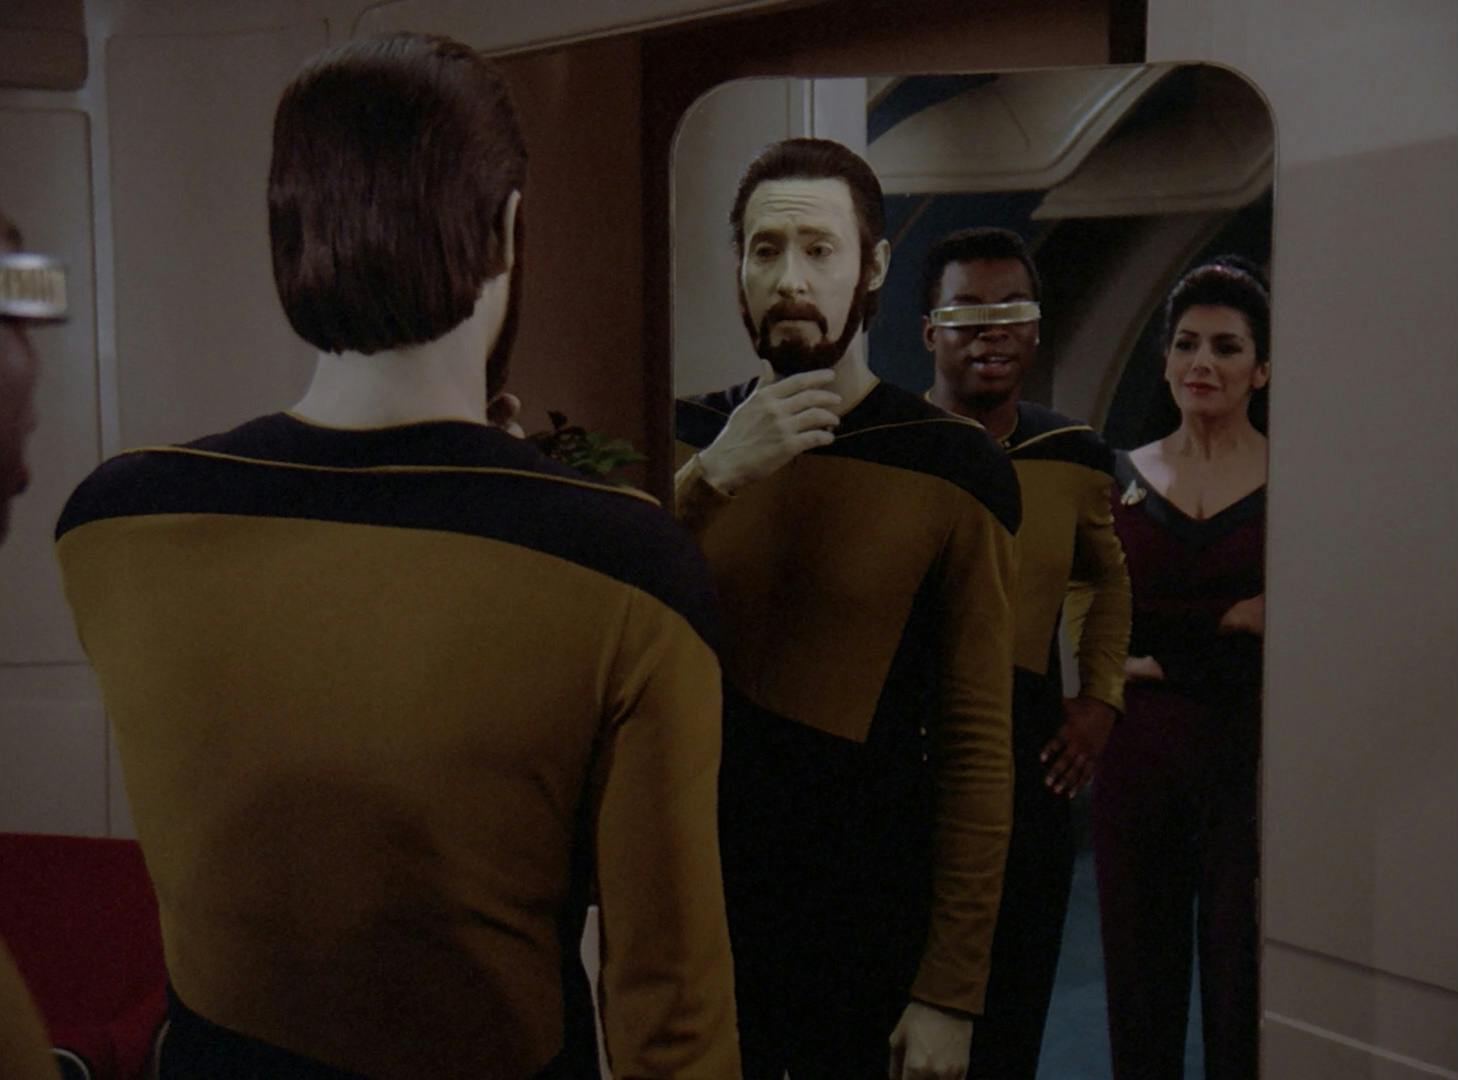 Data with a beard looks at his reflection in the mirror as Geordi La Forge and Deanna Troi amused stand behind him in 'The Schizoid Man'